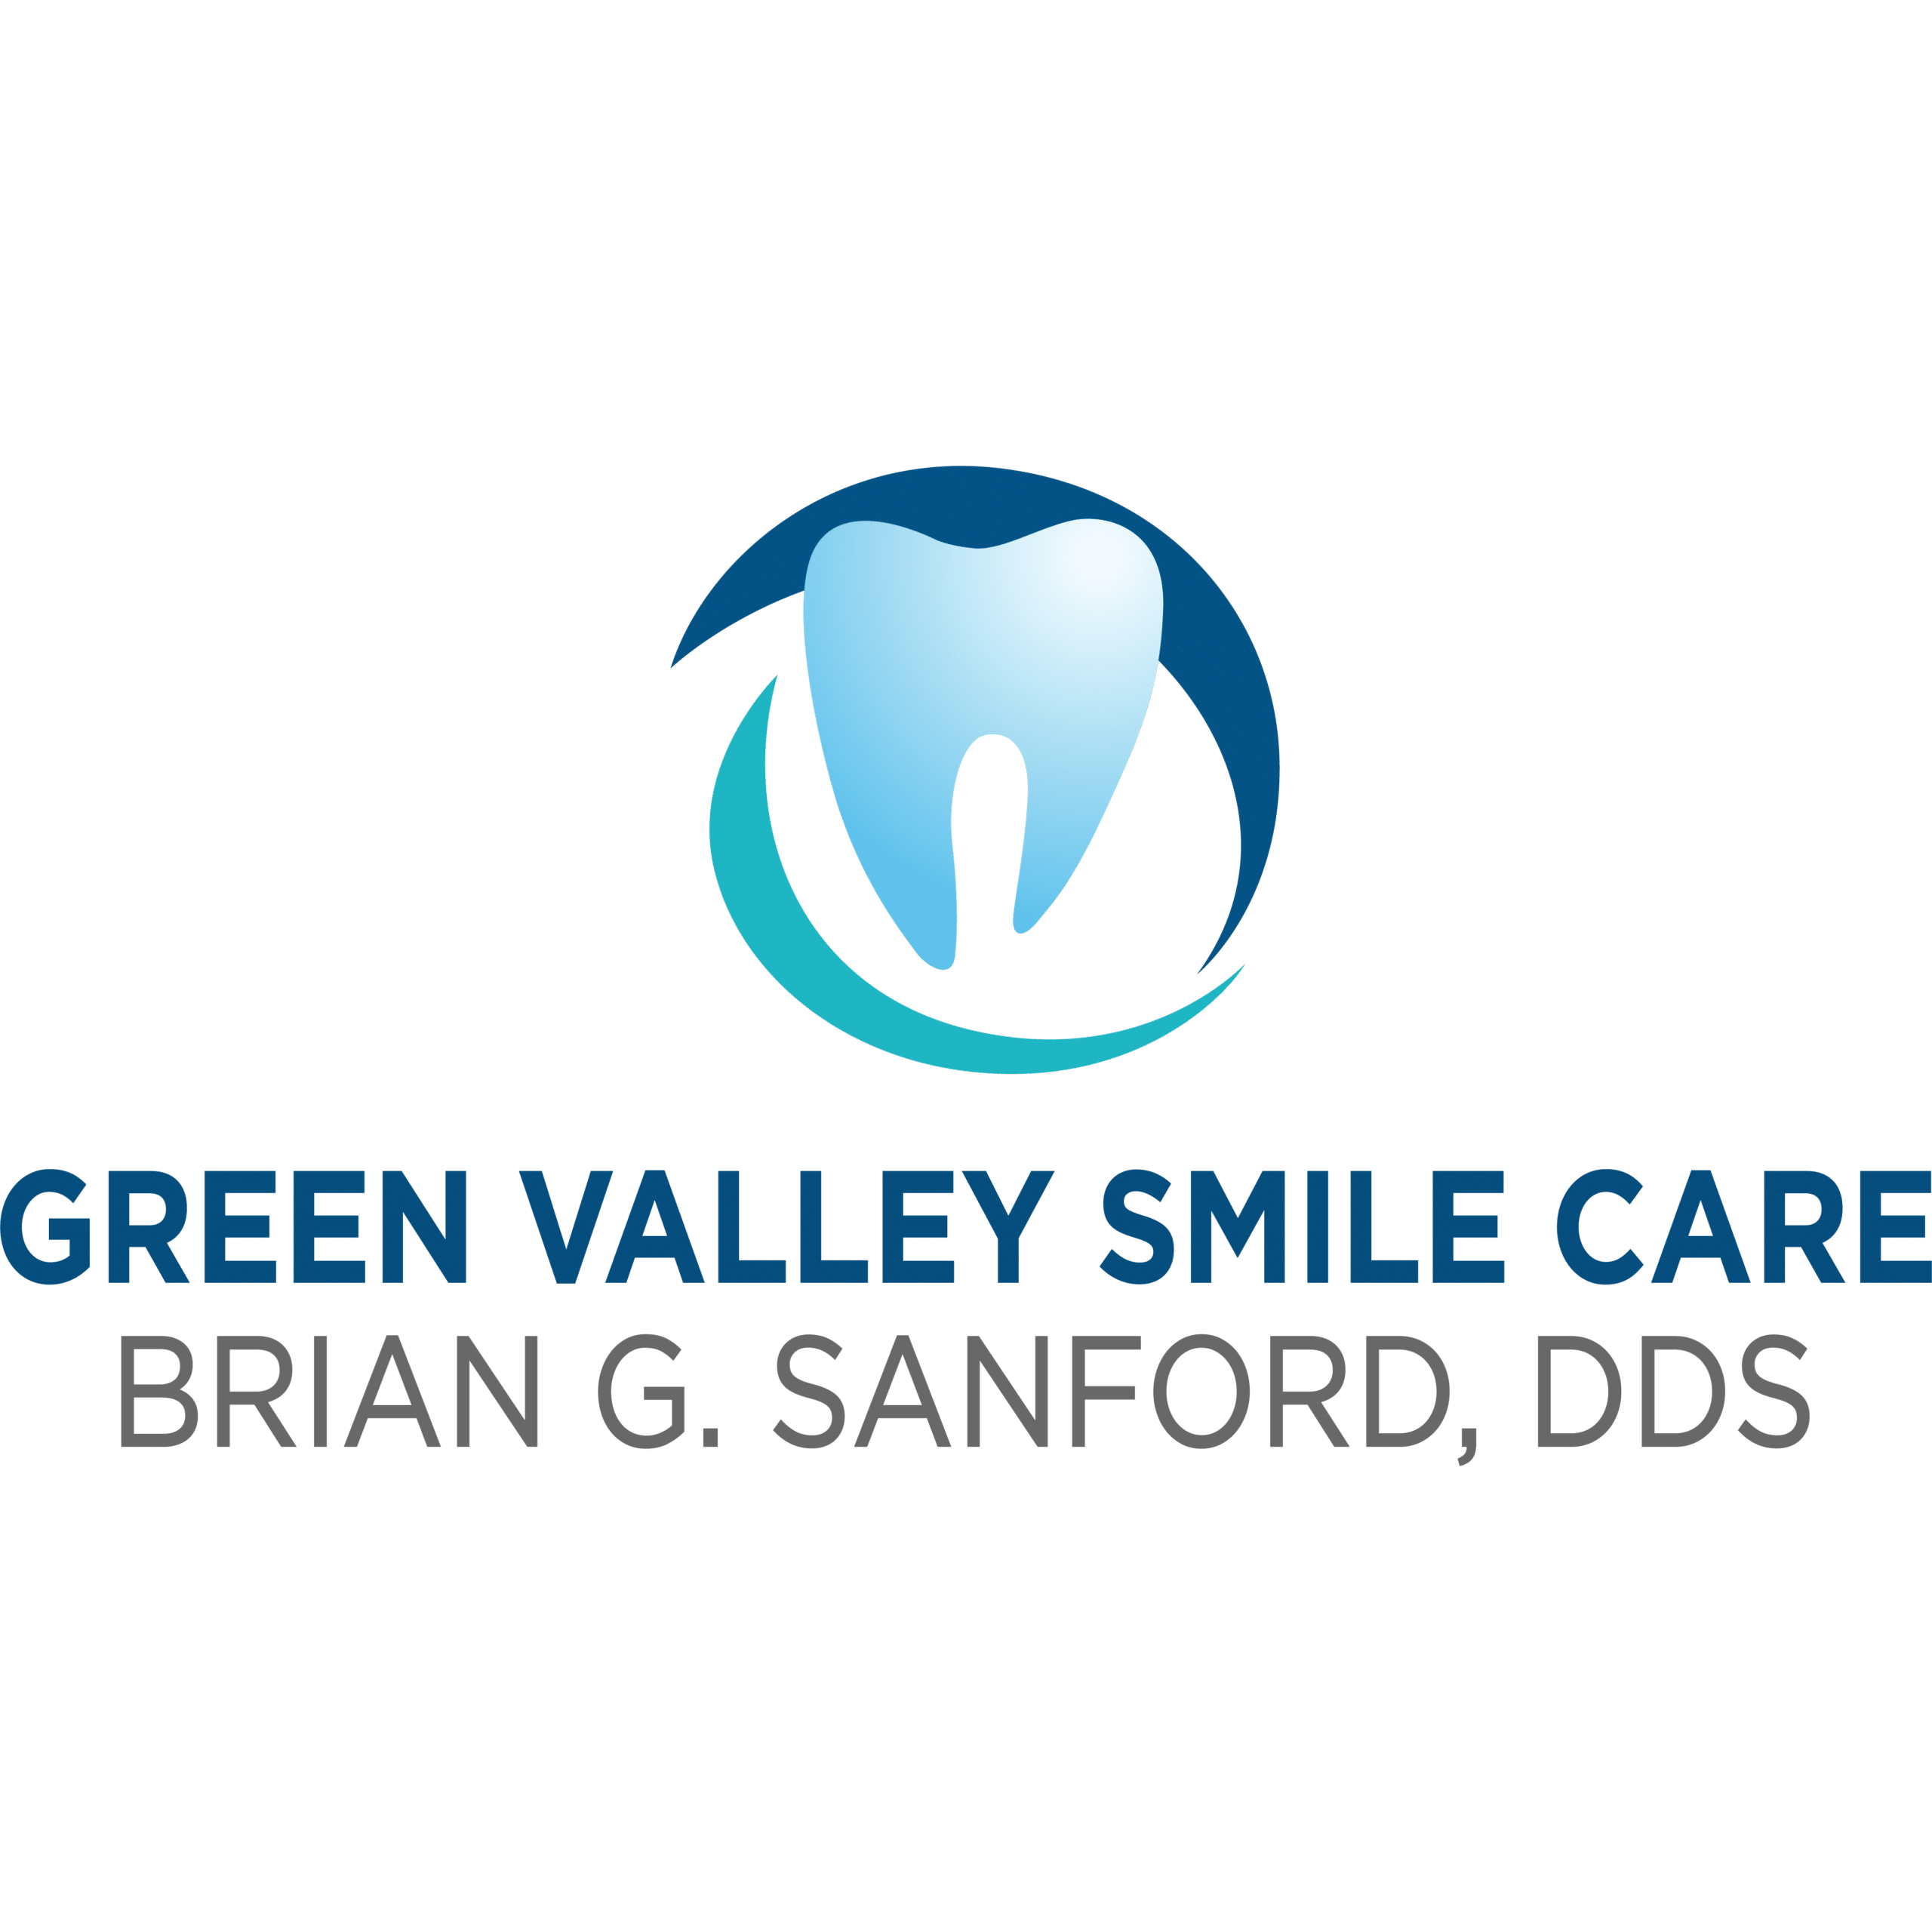 Green Valley Smile Care - Brian G. Sanford, DDS